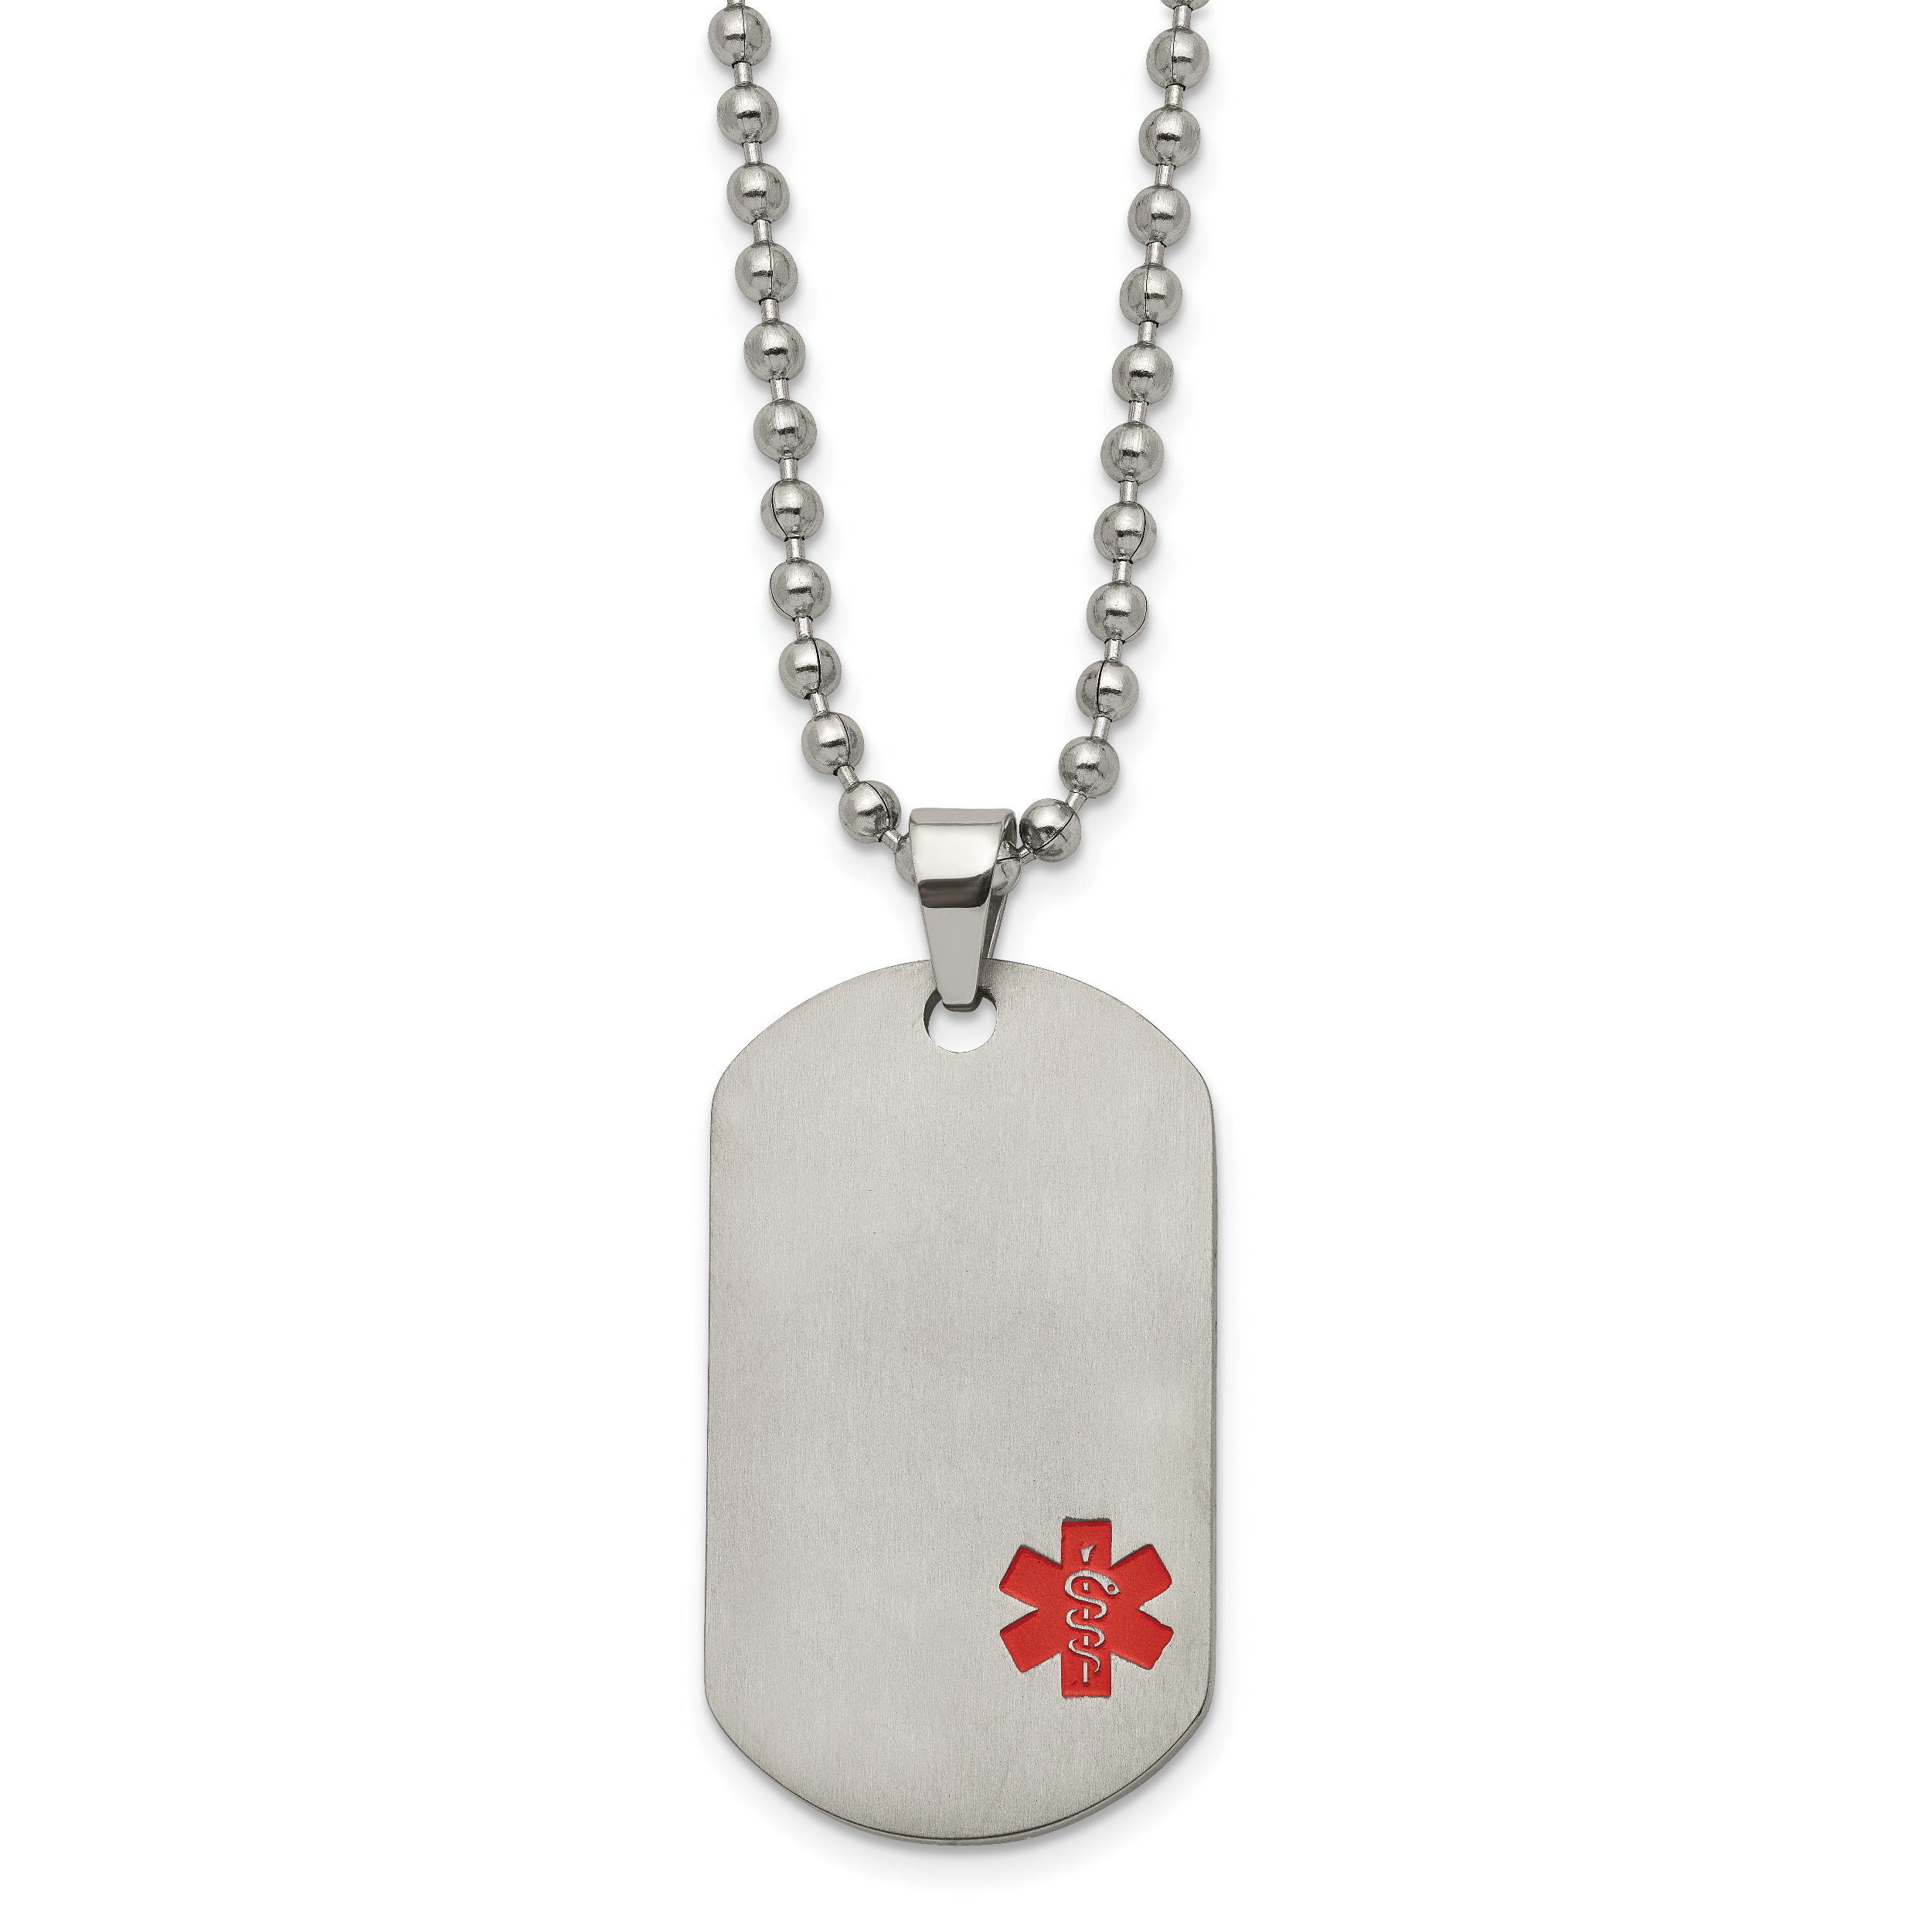 Penicillin Allergy Medical Alert ID necklace -FREE ID Wallet Card,Engraving  USA | eBay